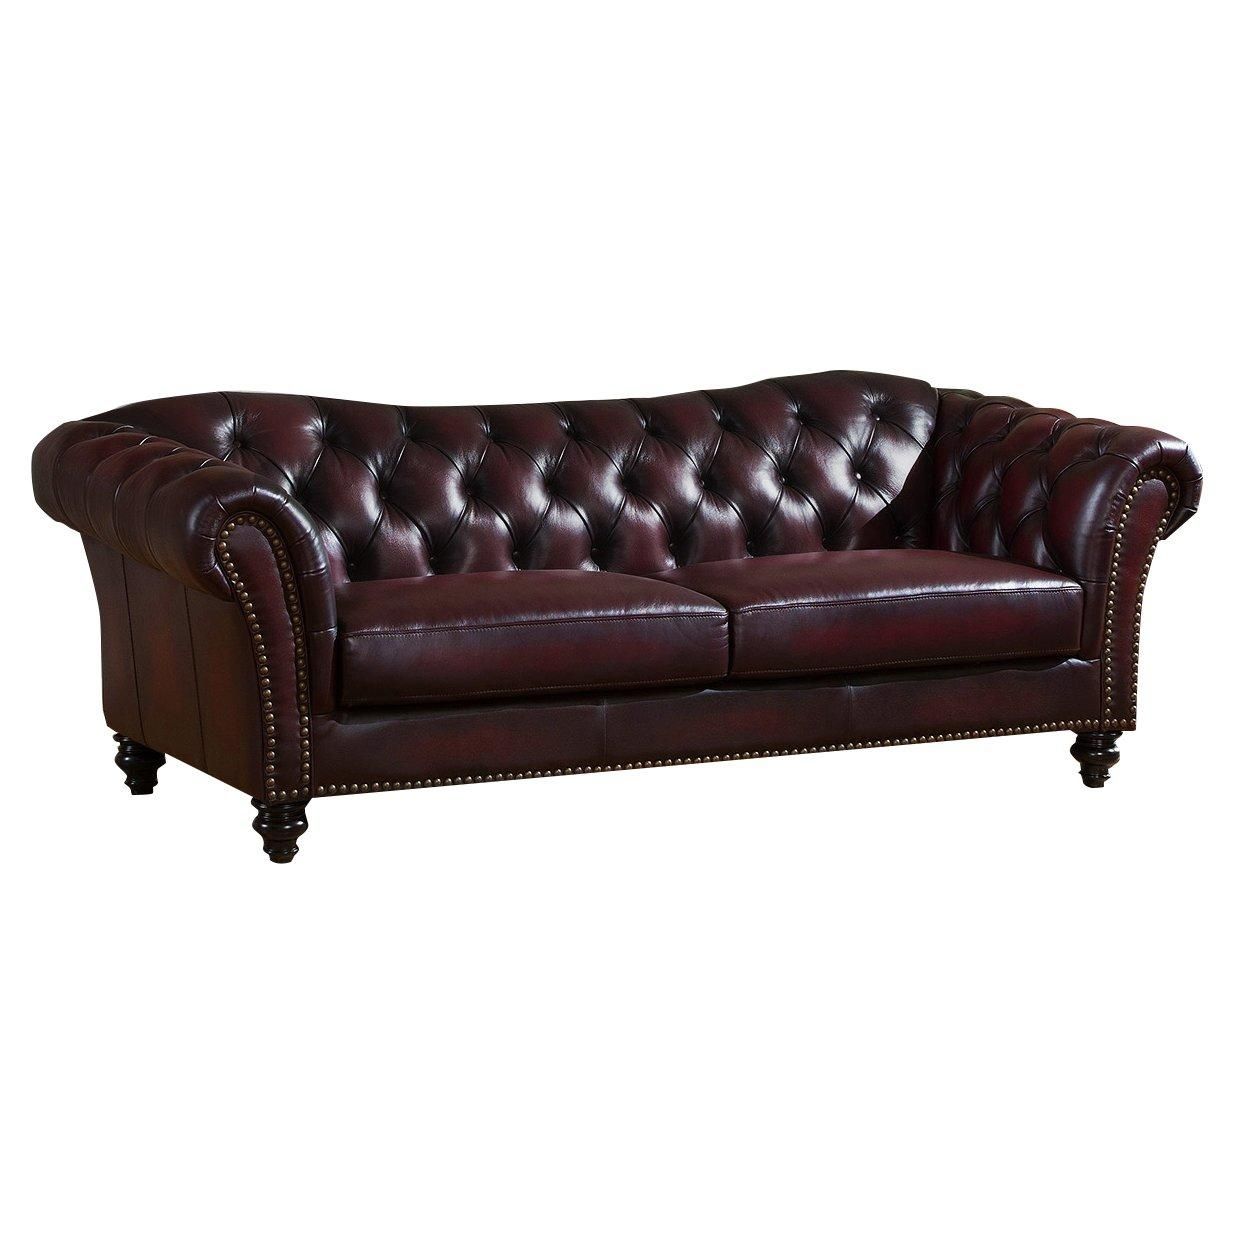 Storage Canterbury Leather Chesterfield Style 3 Seater Sofa Throughout Canterbury Leather Sofas (View 3 of 20)